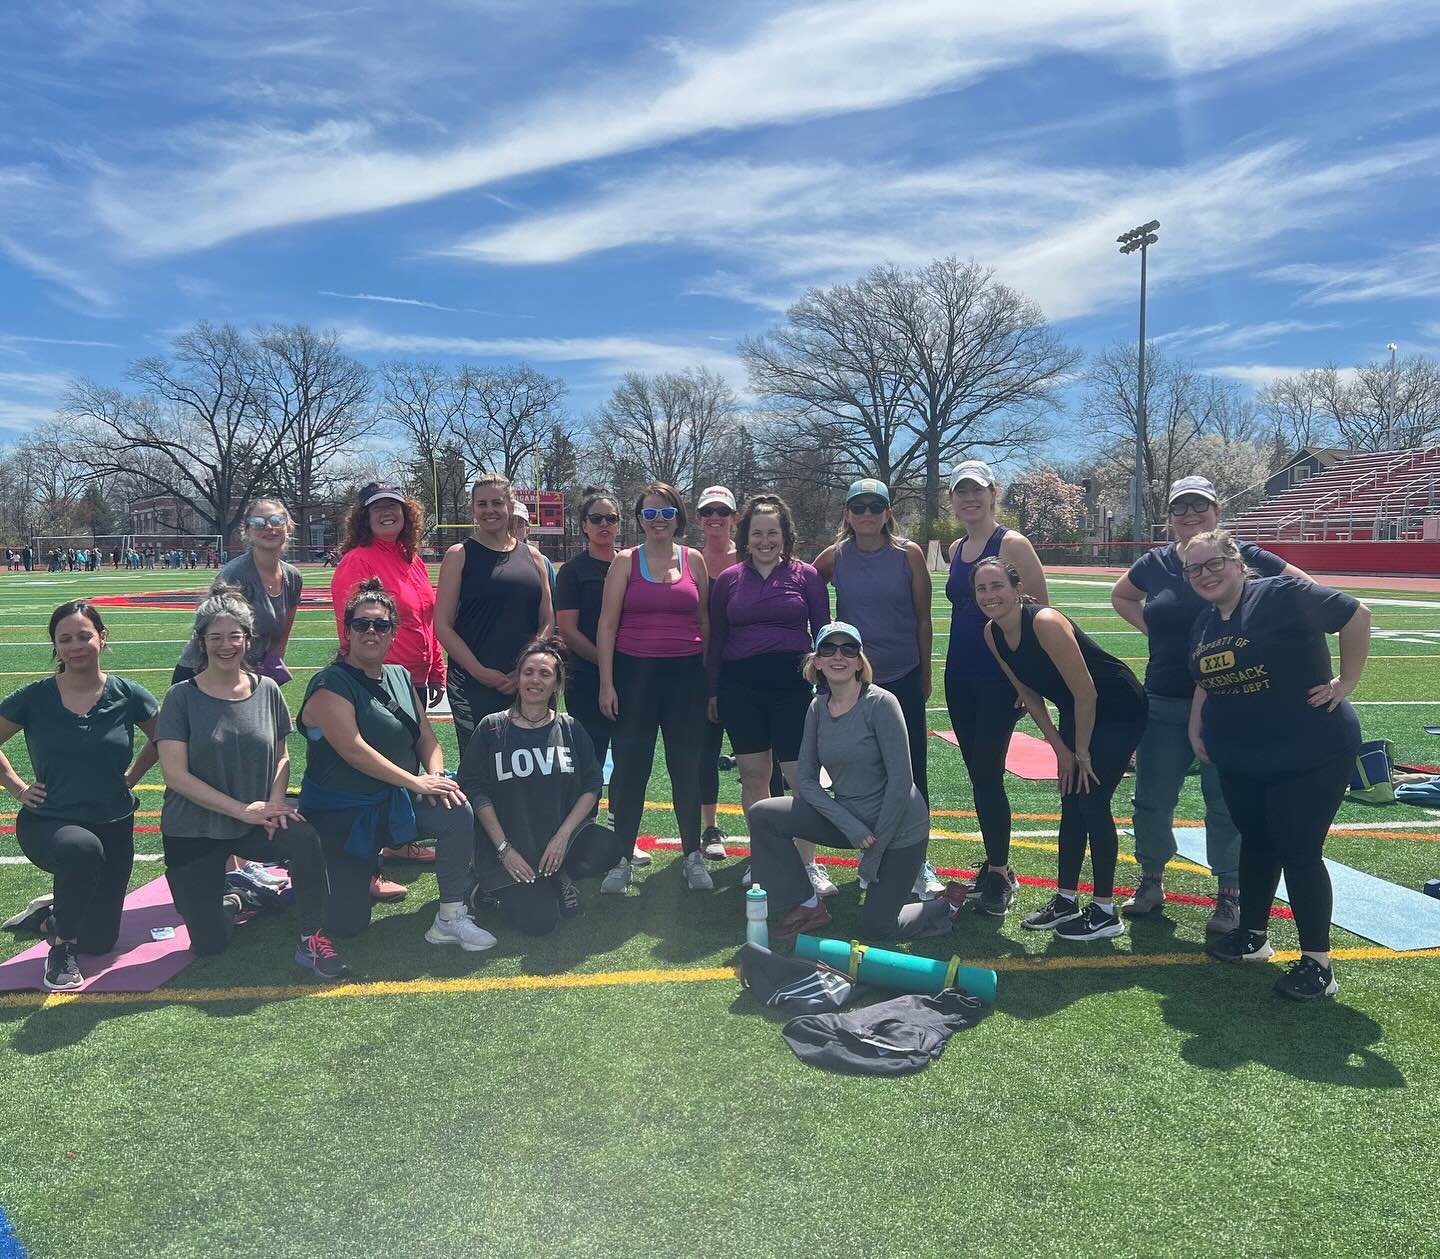 GAME ON!!

Spring boot camp has sprung and I couldn&rsquo;t be happier to welcome so many new awesome people to the group. 

It&rsquo;s going to be a fun and sweaty spring. Stay strong and healthy! 💪🏻

#womensfitness #strongwomen #womenwholift #str